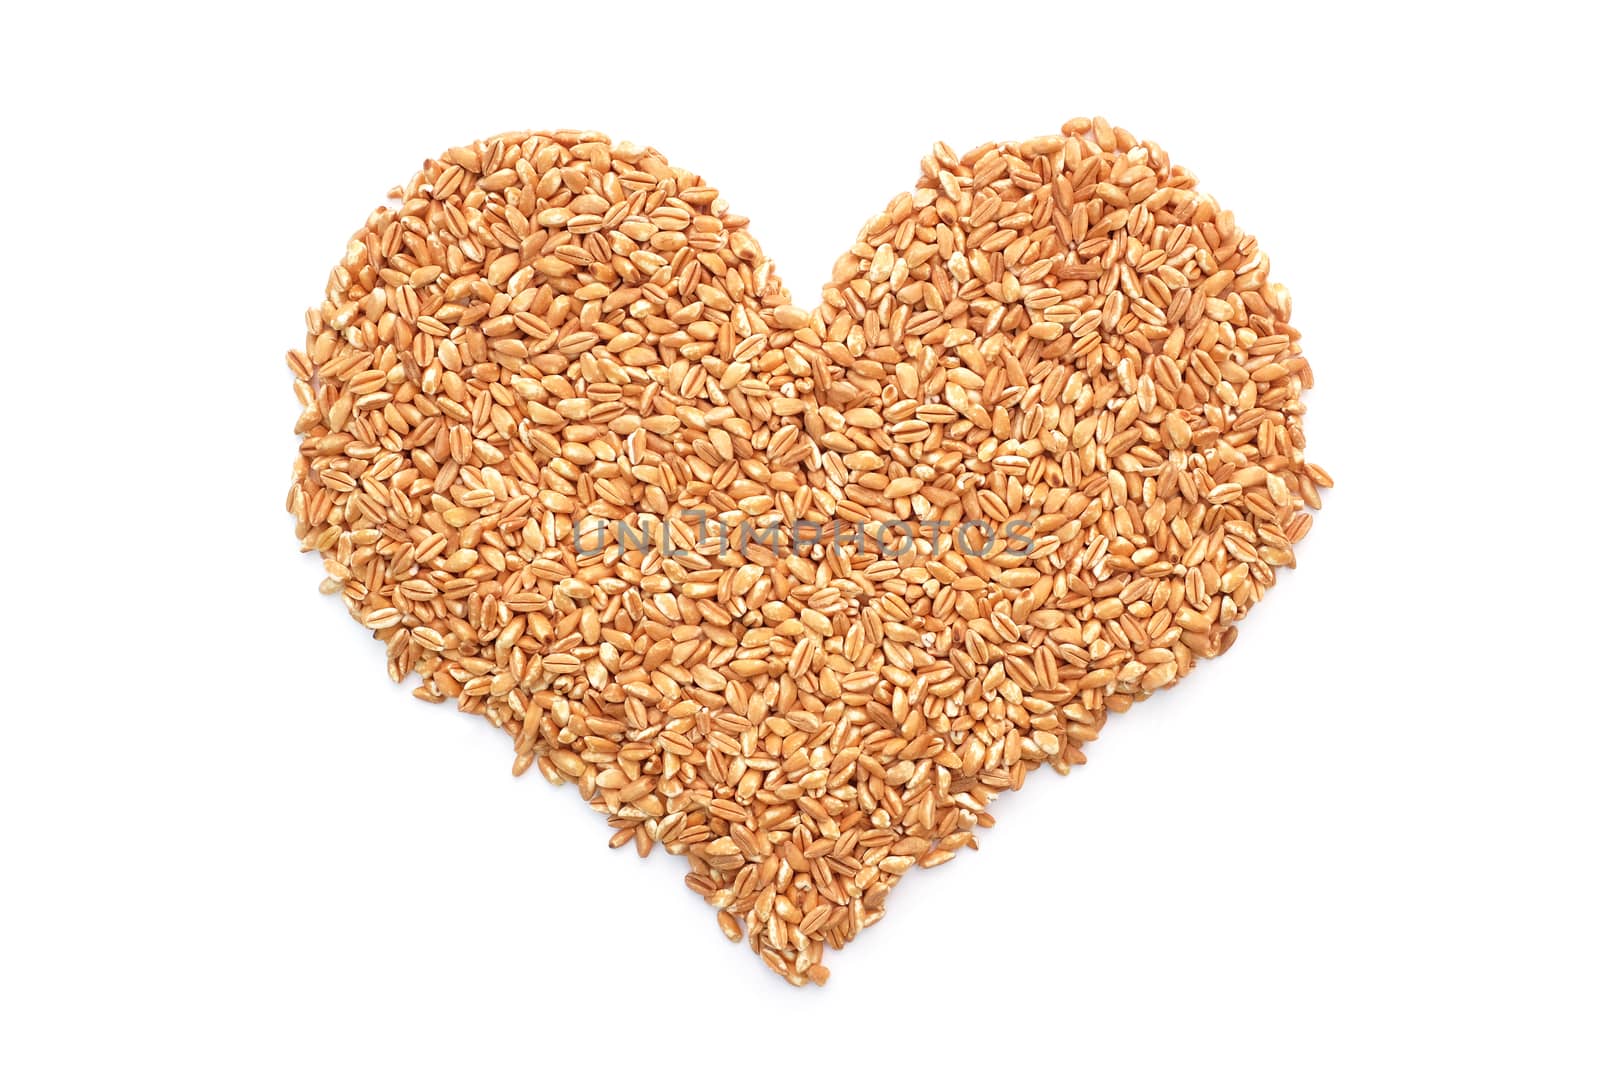 Farro dicocco in a heart shape, isolated on a white background